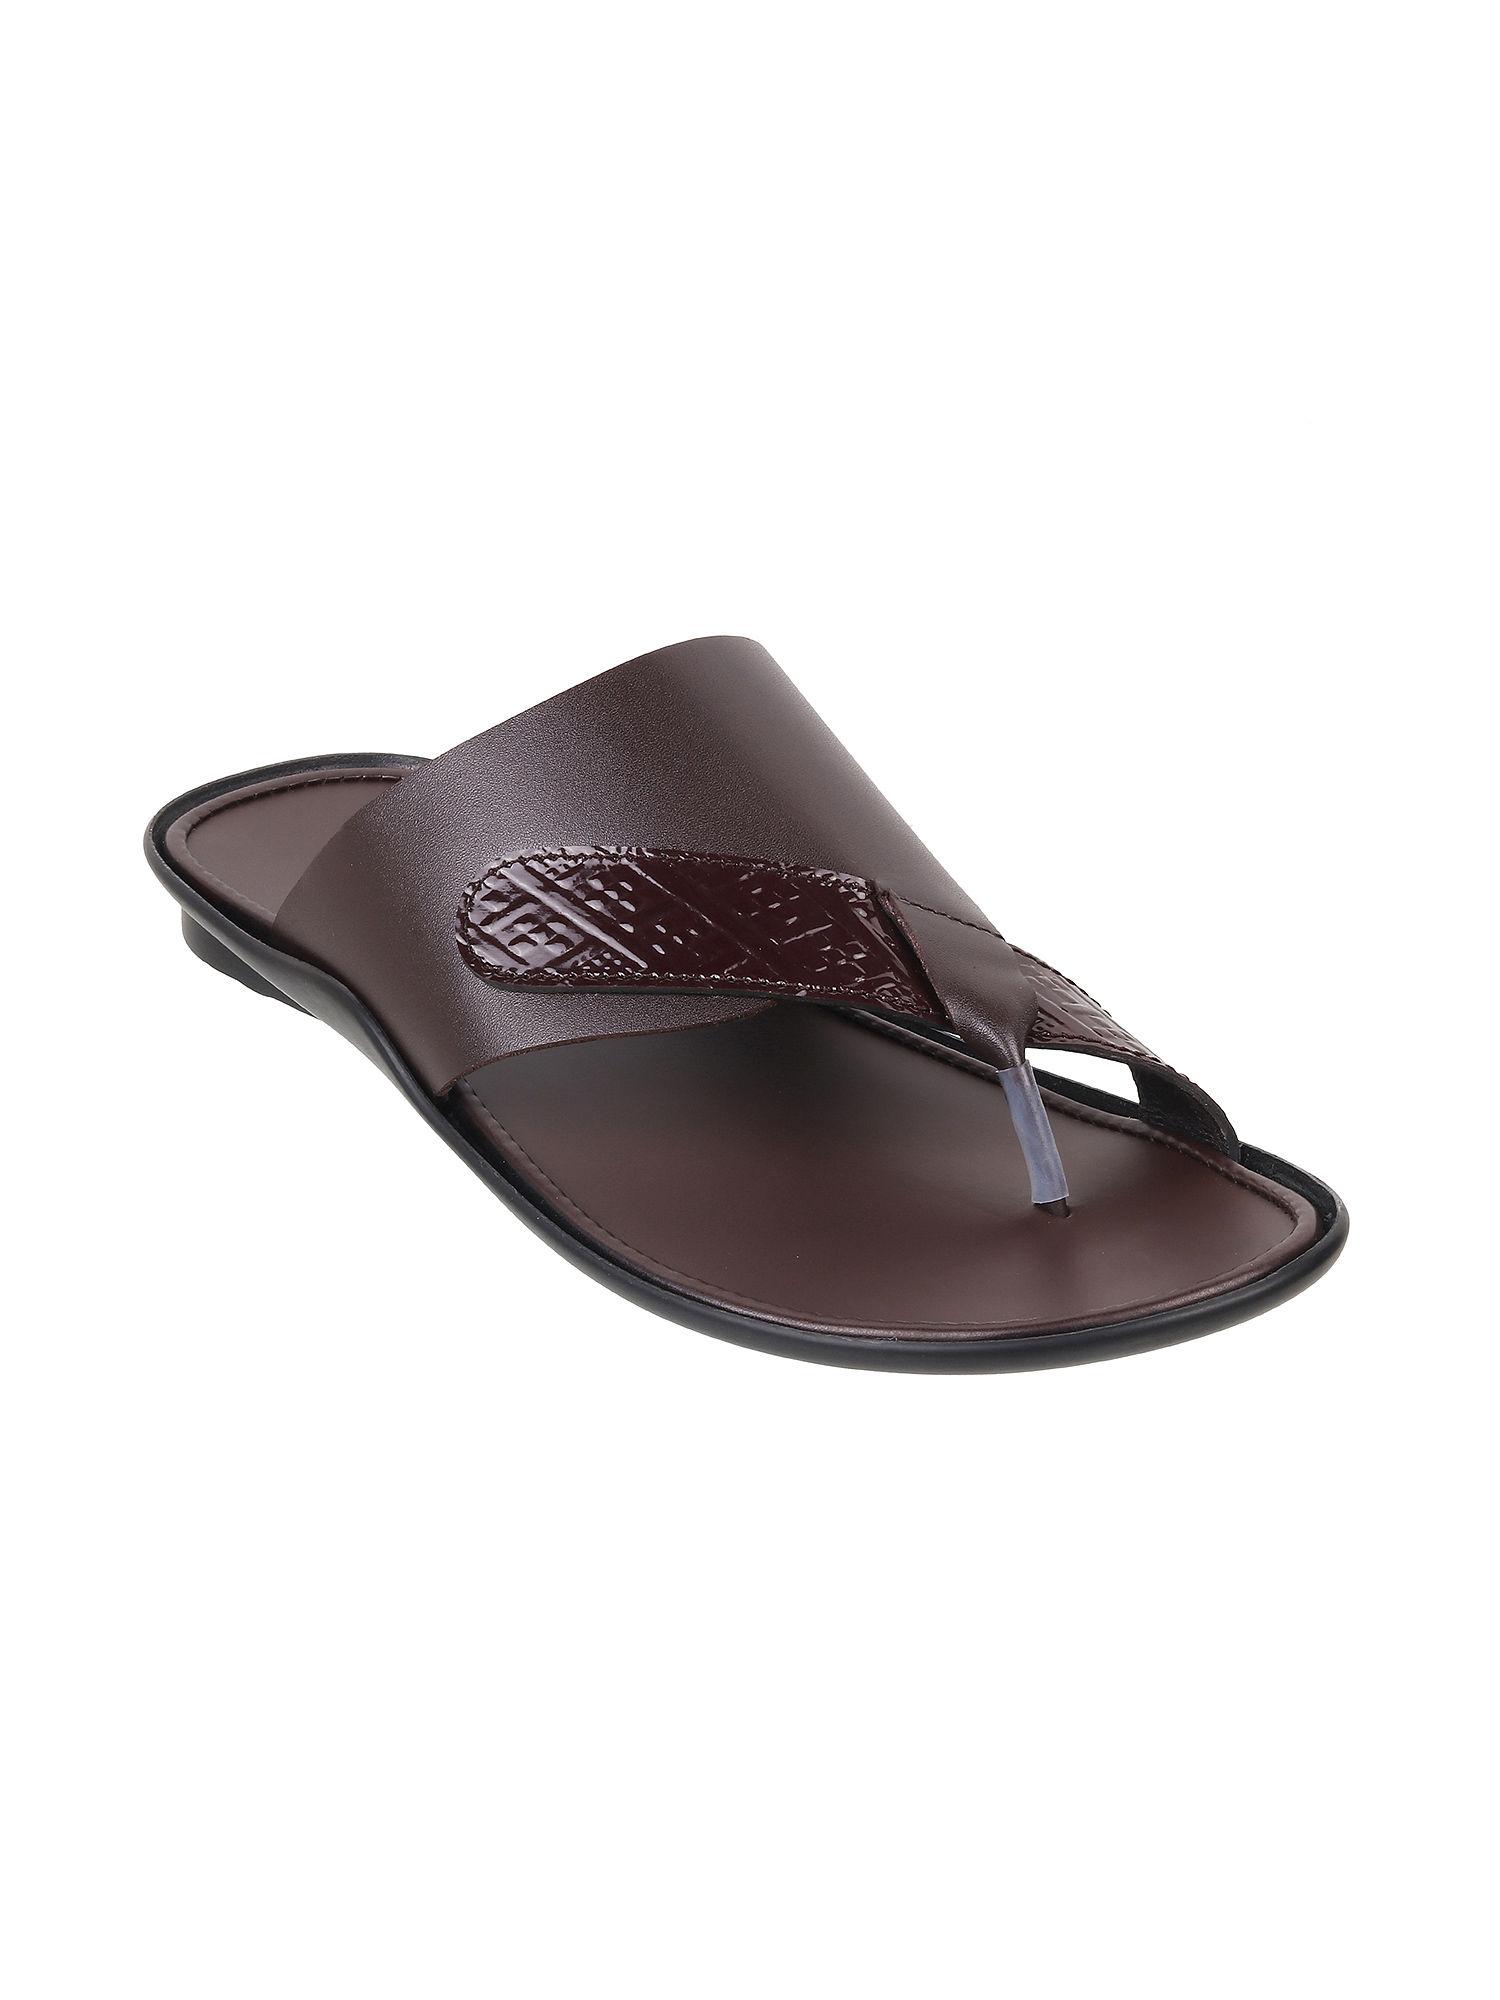 stylish men leather brown slippers